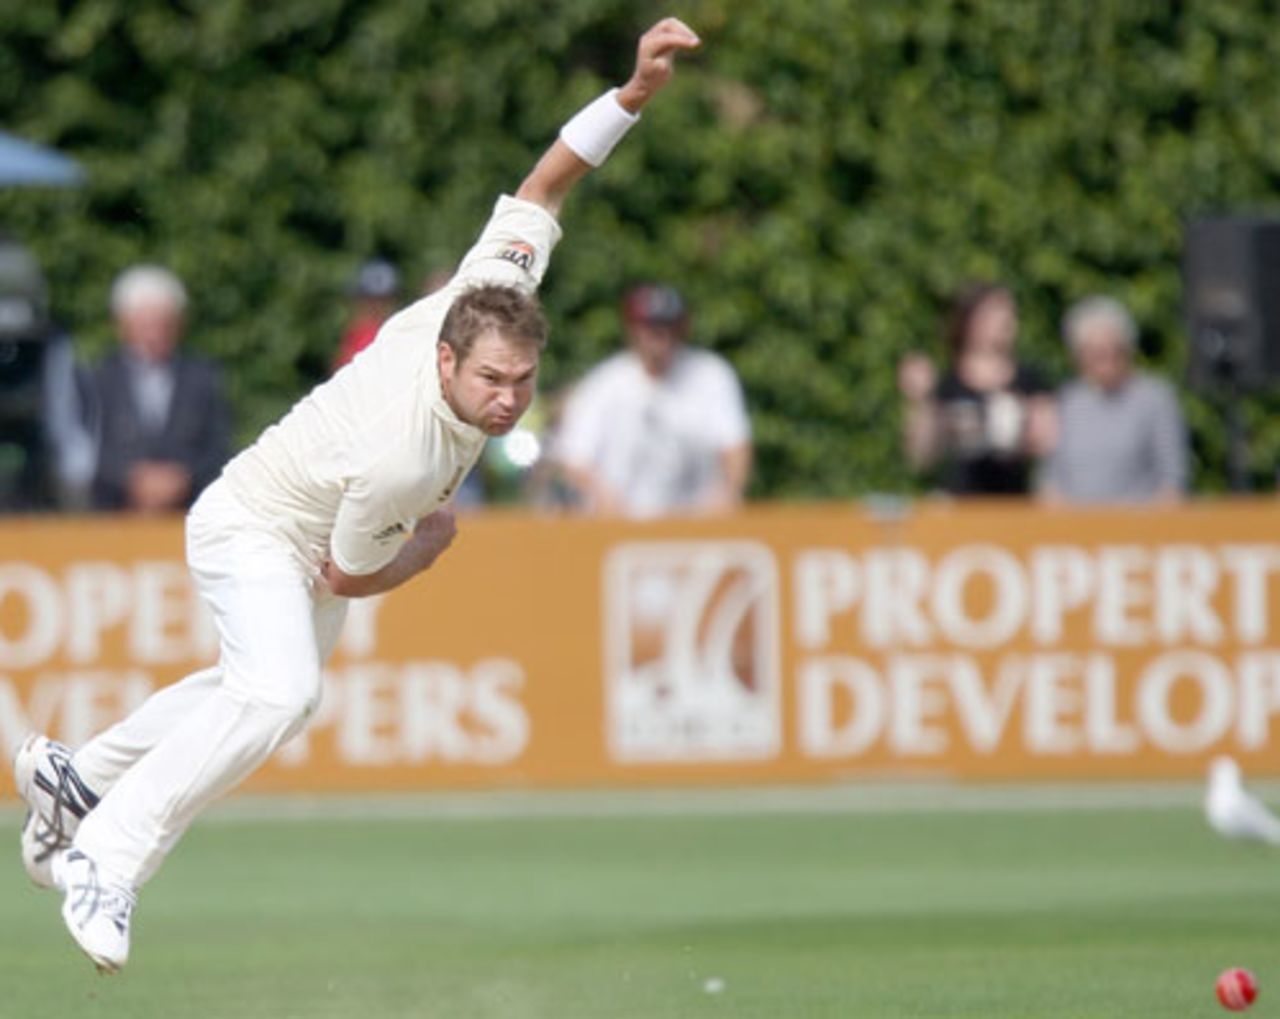 Ryan Harris picked up two wickets on debut, 1st Test, 3rd day, Wellington, March 21, 2010